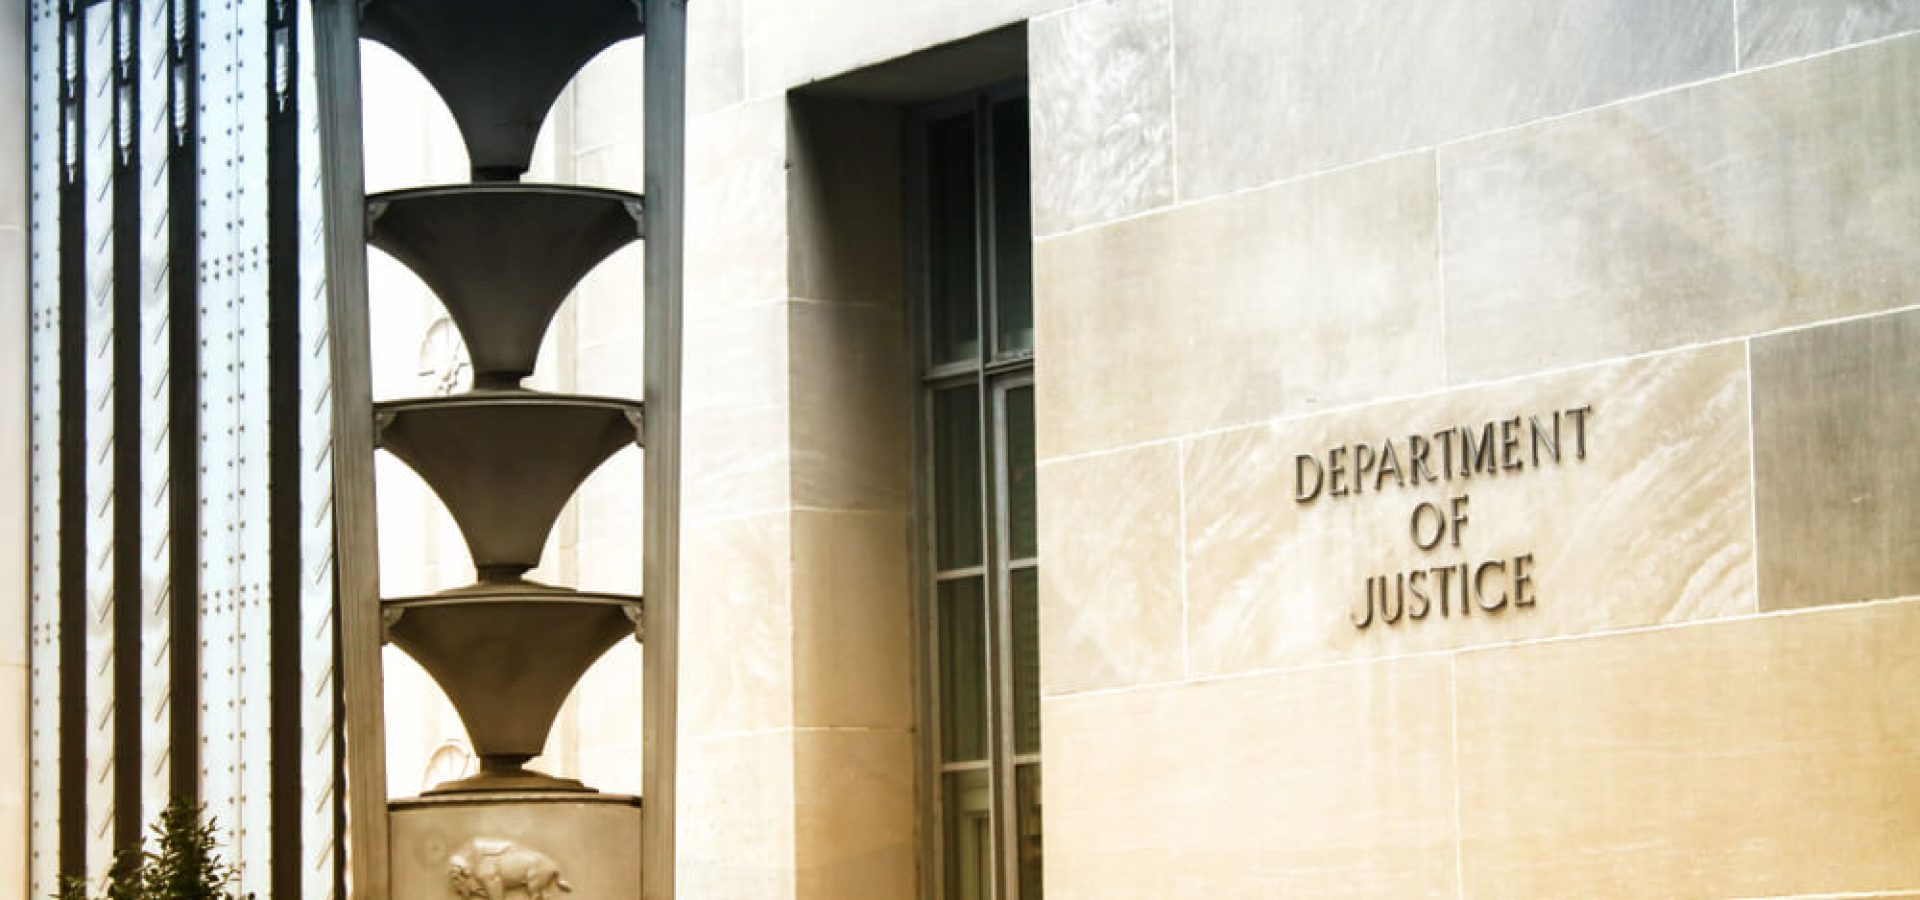 the Department of Justice photo